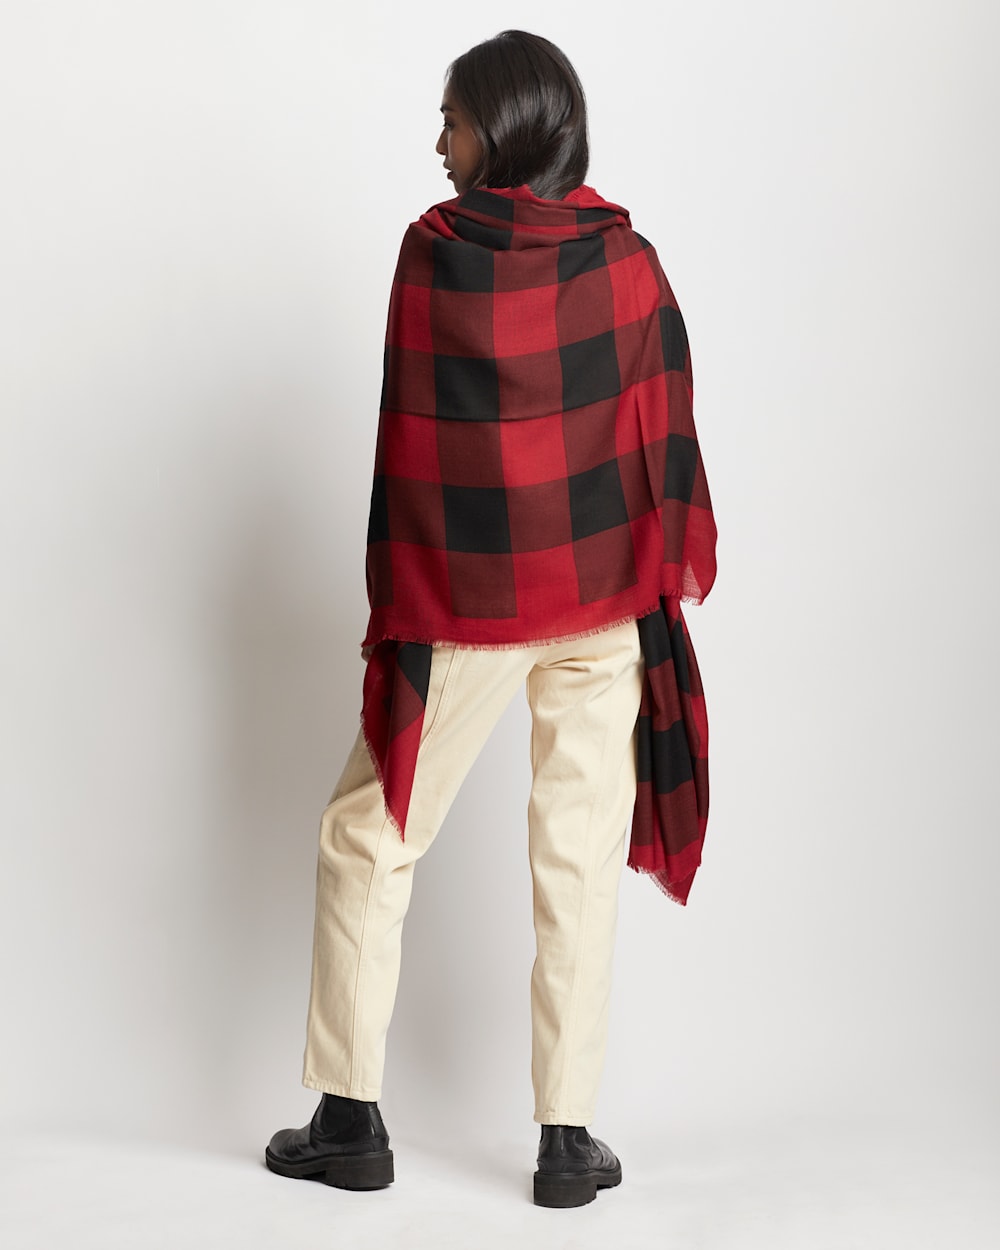 ALTERNATE VIEW OF PLAID FEATHERWEIGHT WOOL SCARF IN RED BUFFALO CHECK image number 4